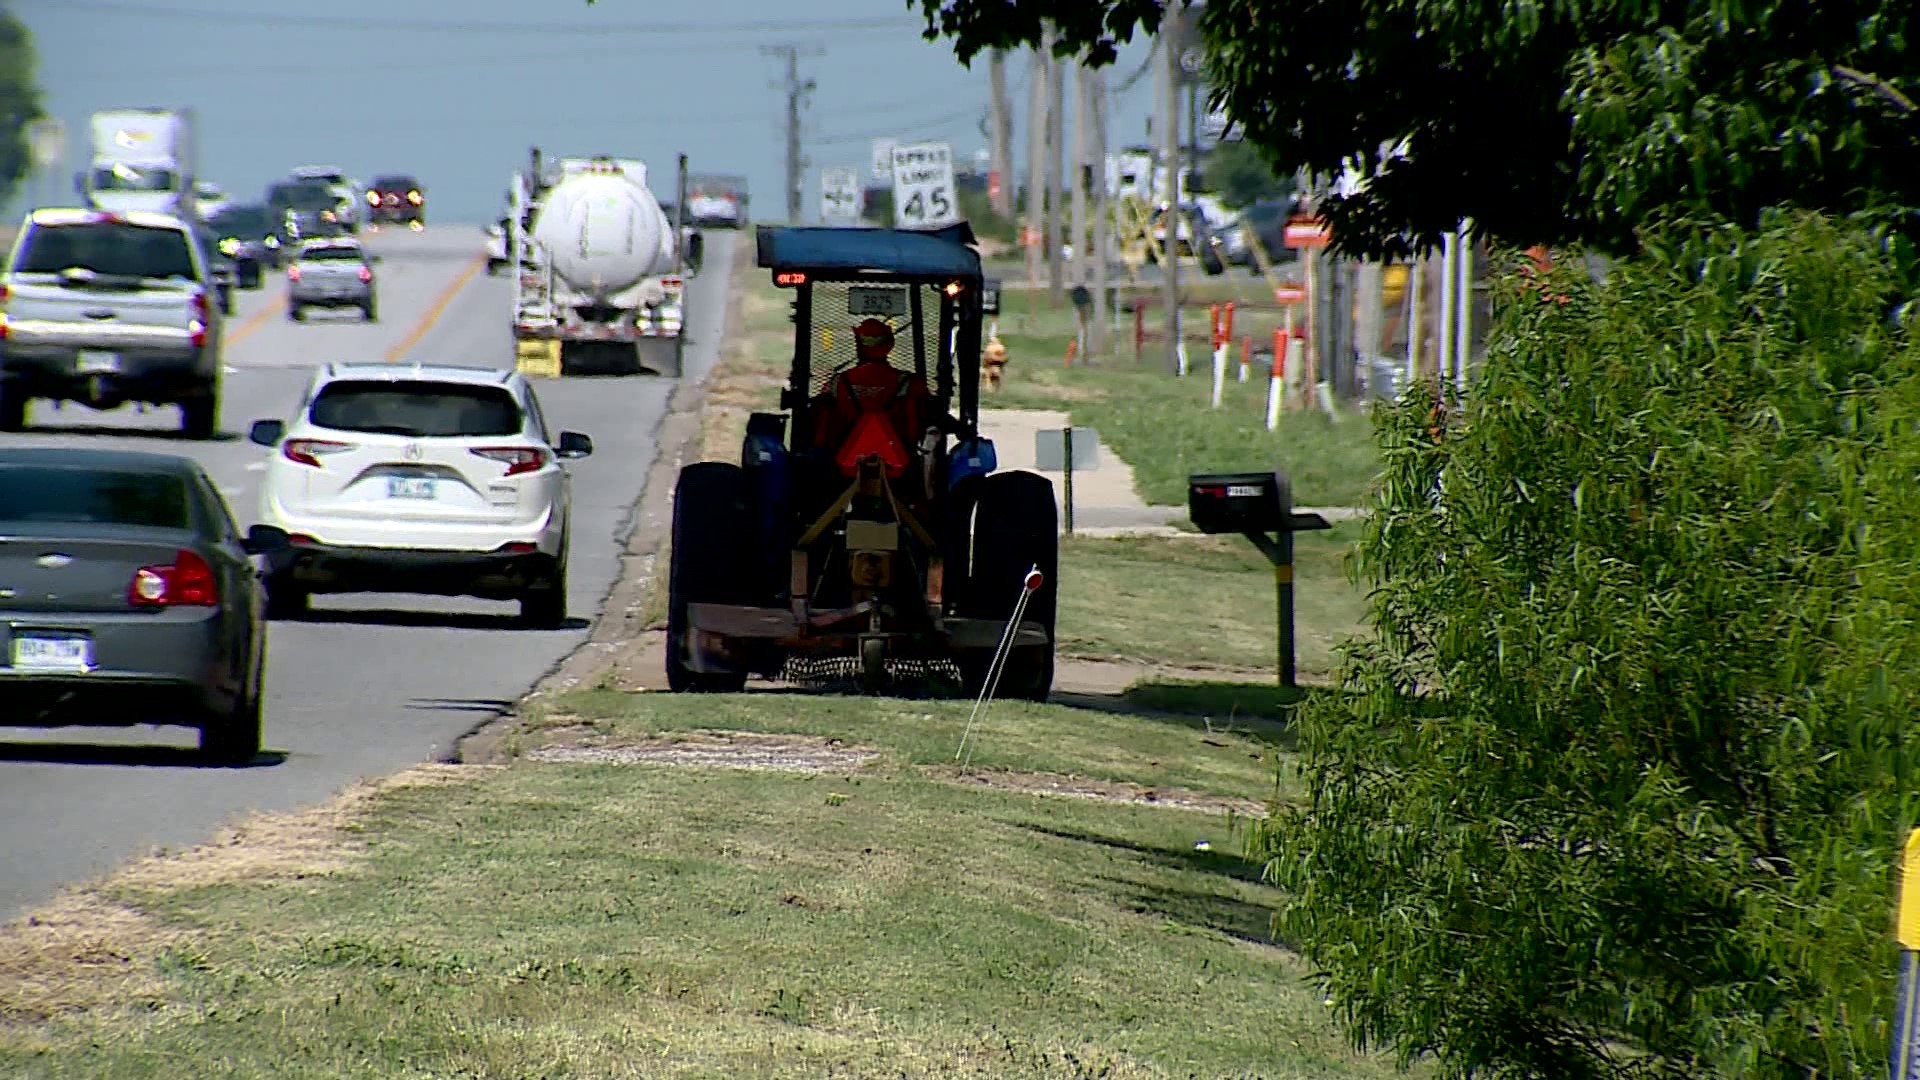 The Arkansas Department of Transportation mows the grass on the interstates and highways in three cycles.